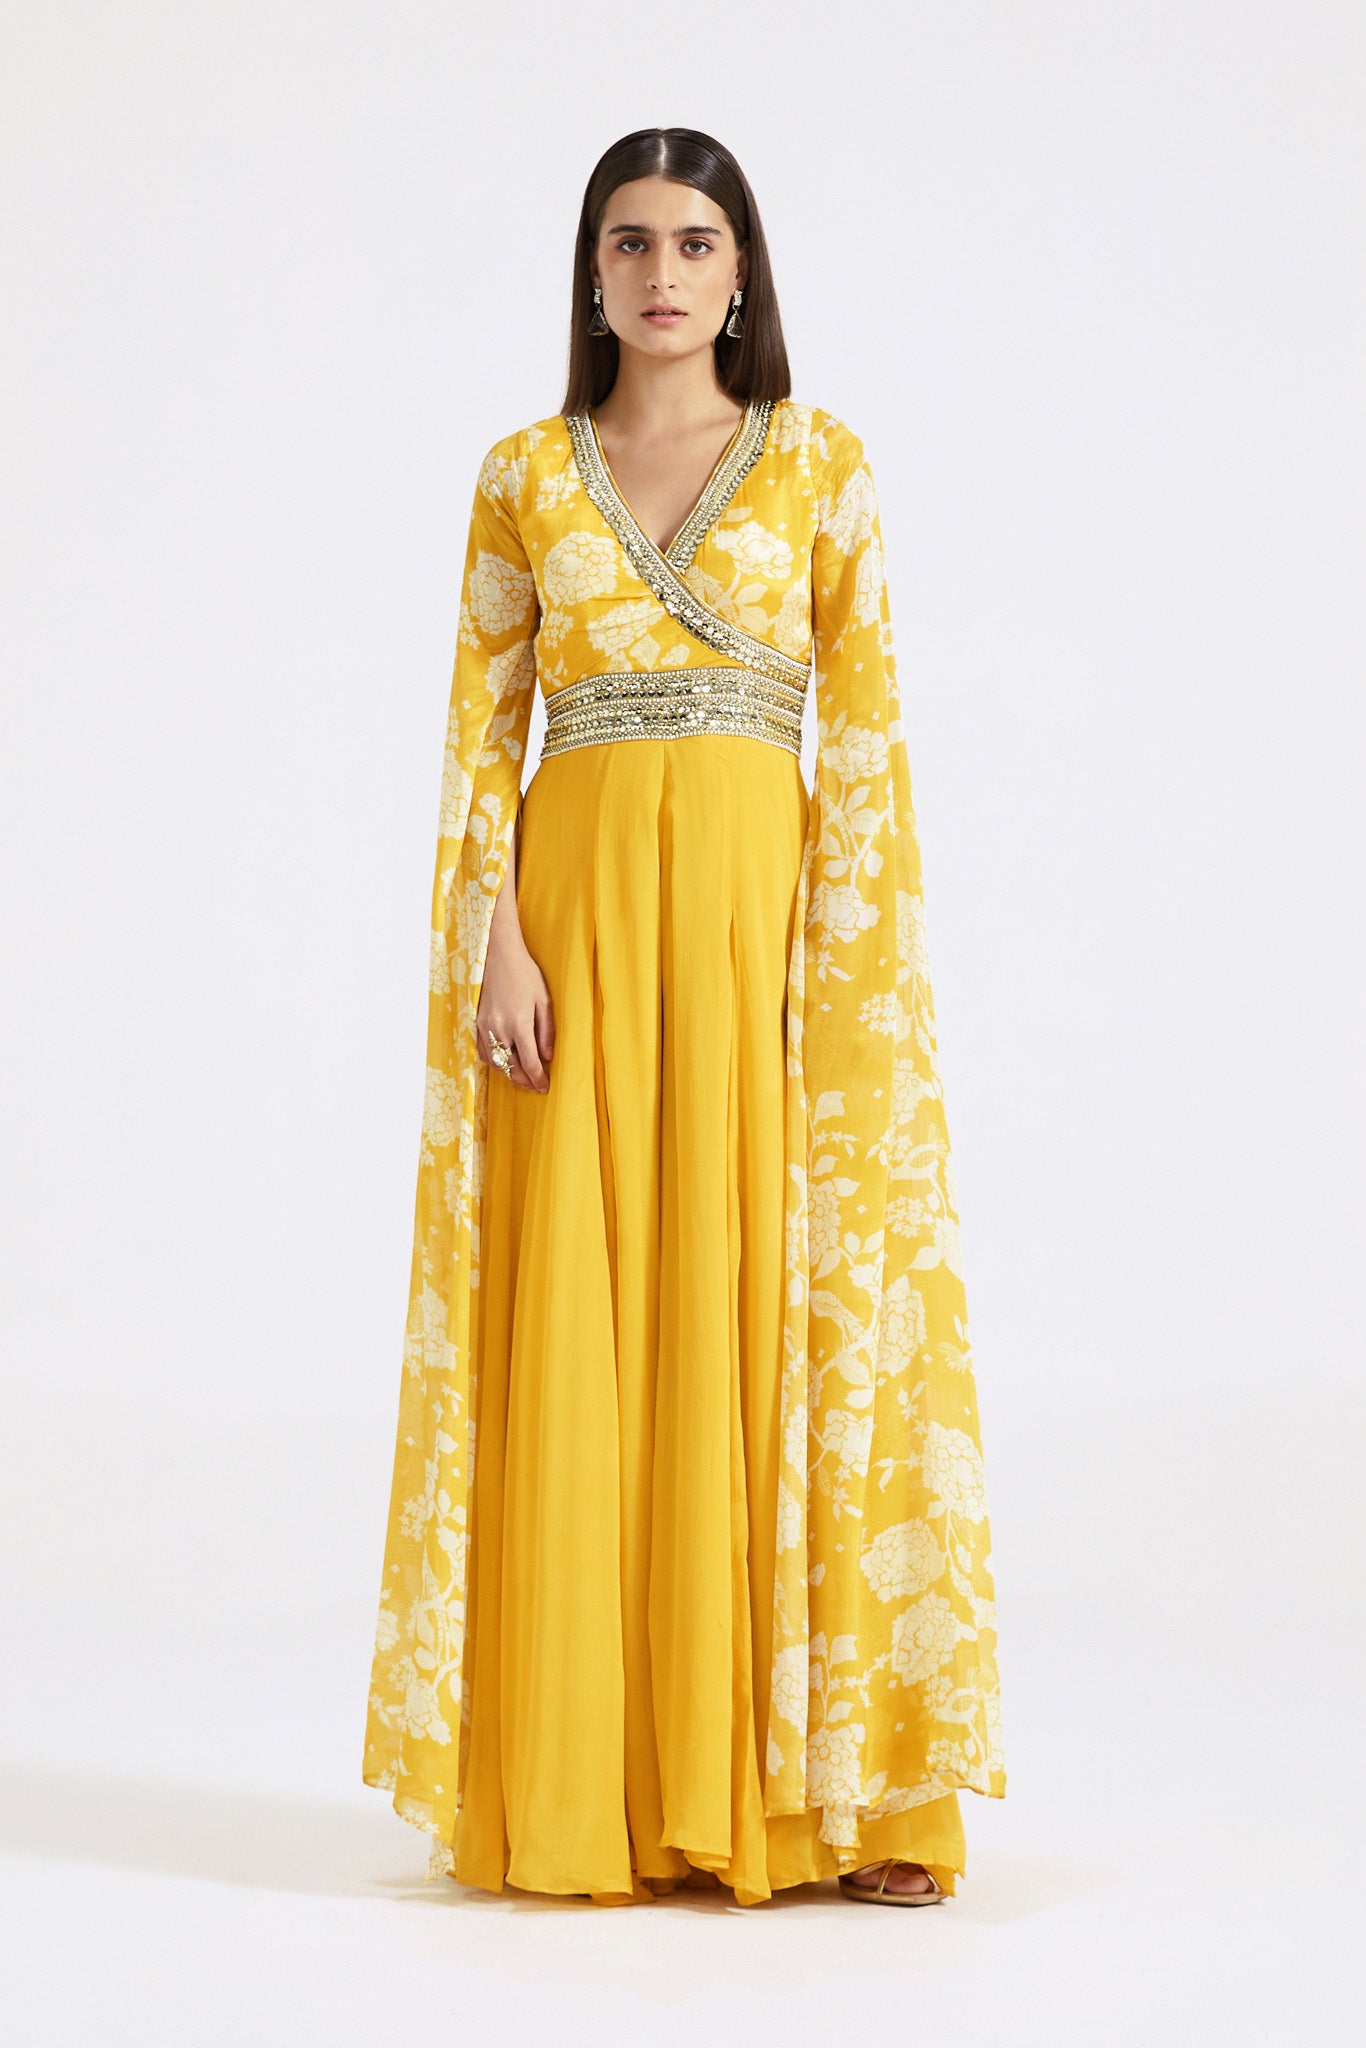 Buy yellow printed chinon jumpsuit online in USA with cape sleeves. Shop the best and latest designs in embroidered sarees, designer sarees, Anarkali suit, lehengas, sharara suits for weddings and special occasions from Pure Elegance Indian fashion store in USA.-full view